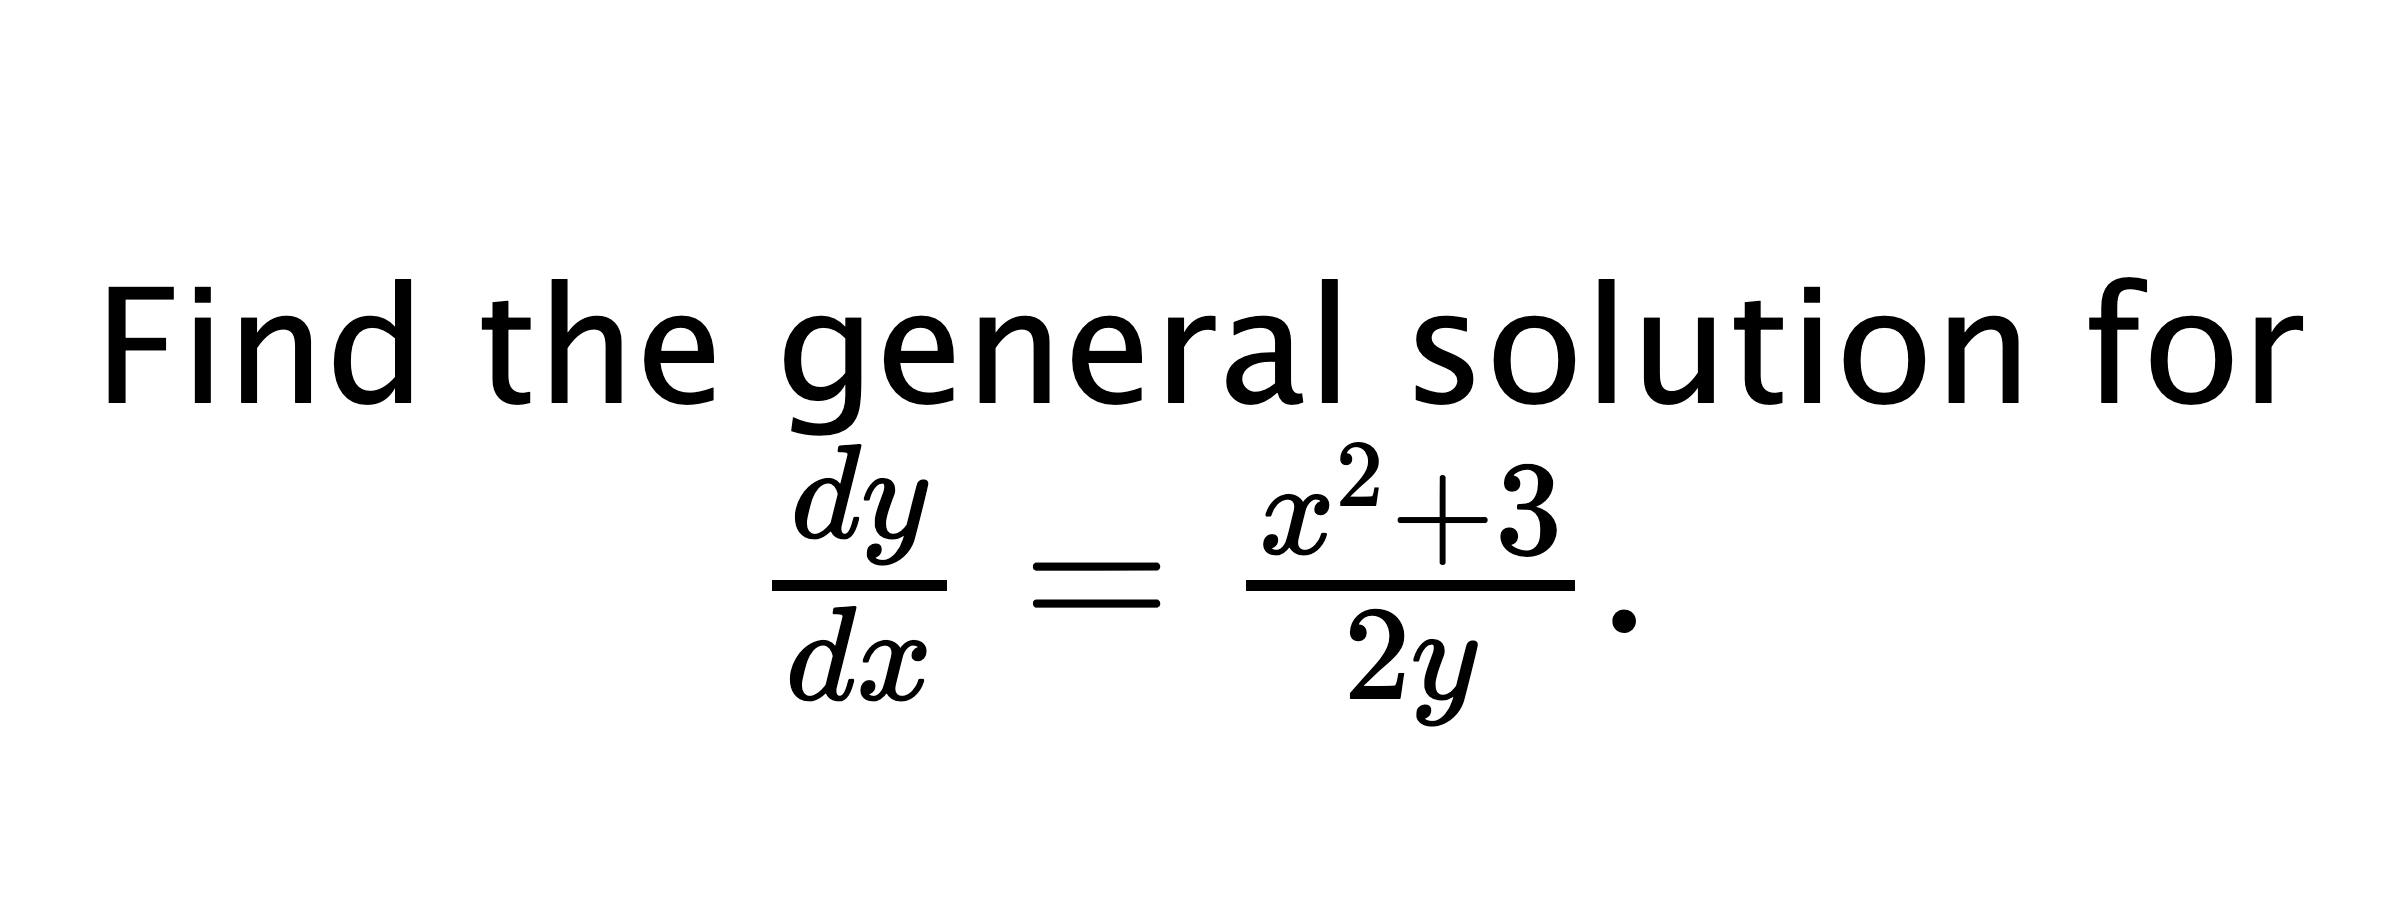  Find the general solution for $ \frac{dy}{dx}=\frac{x^{2}+3}{2y}. $